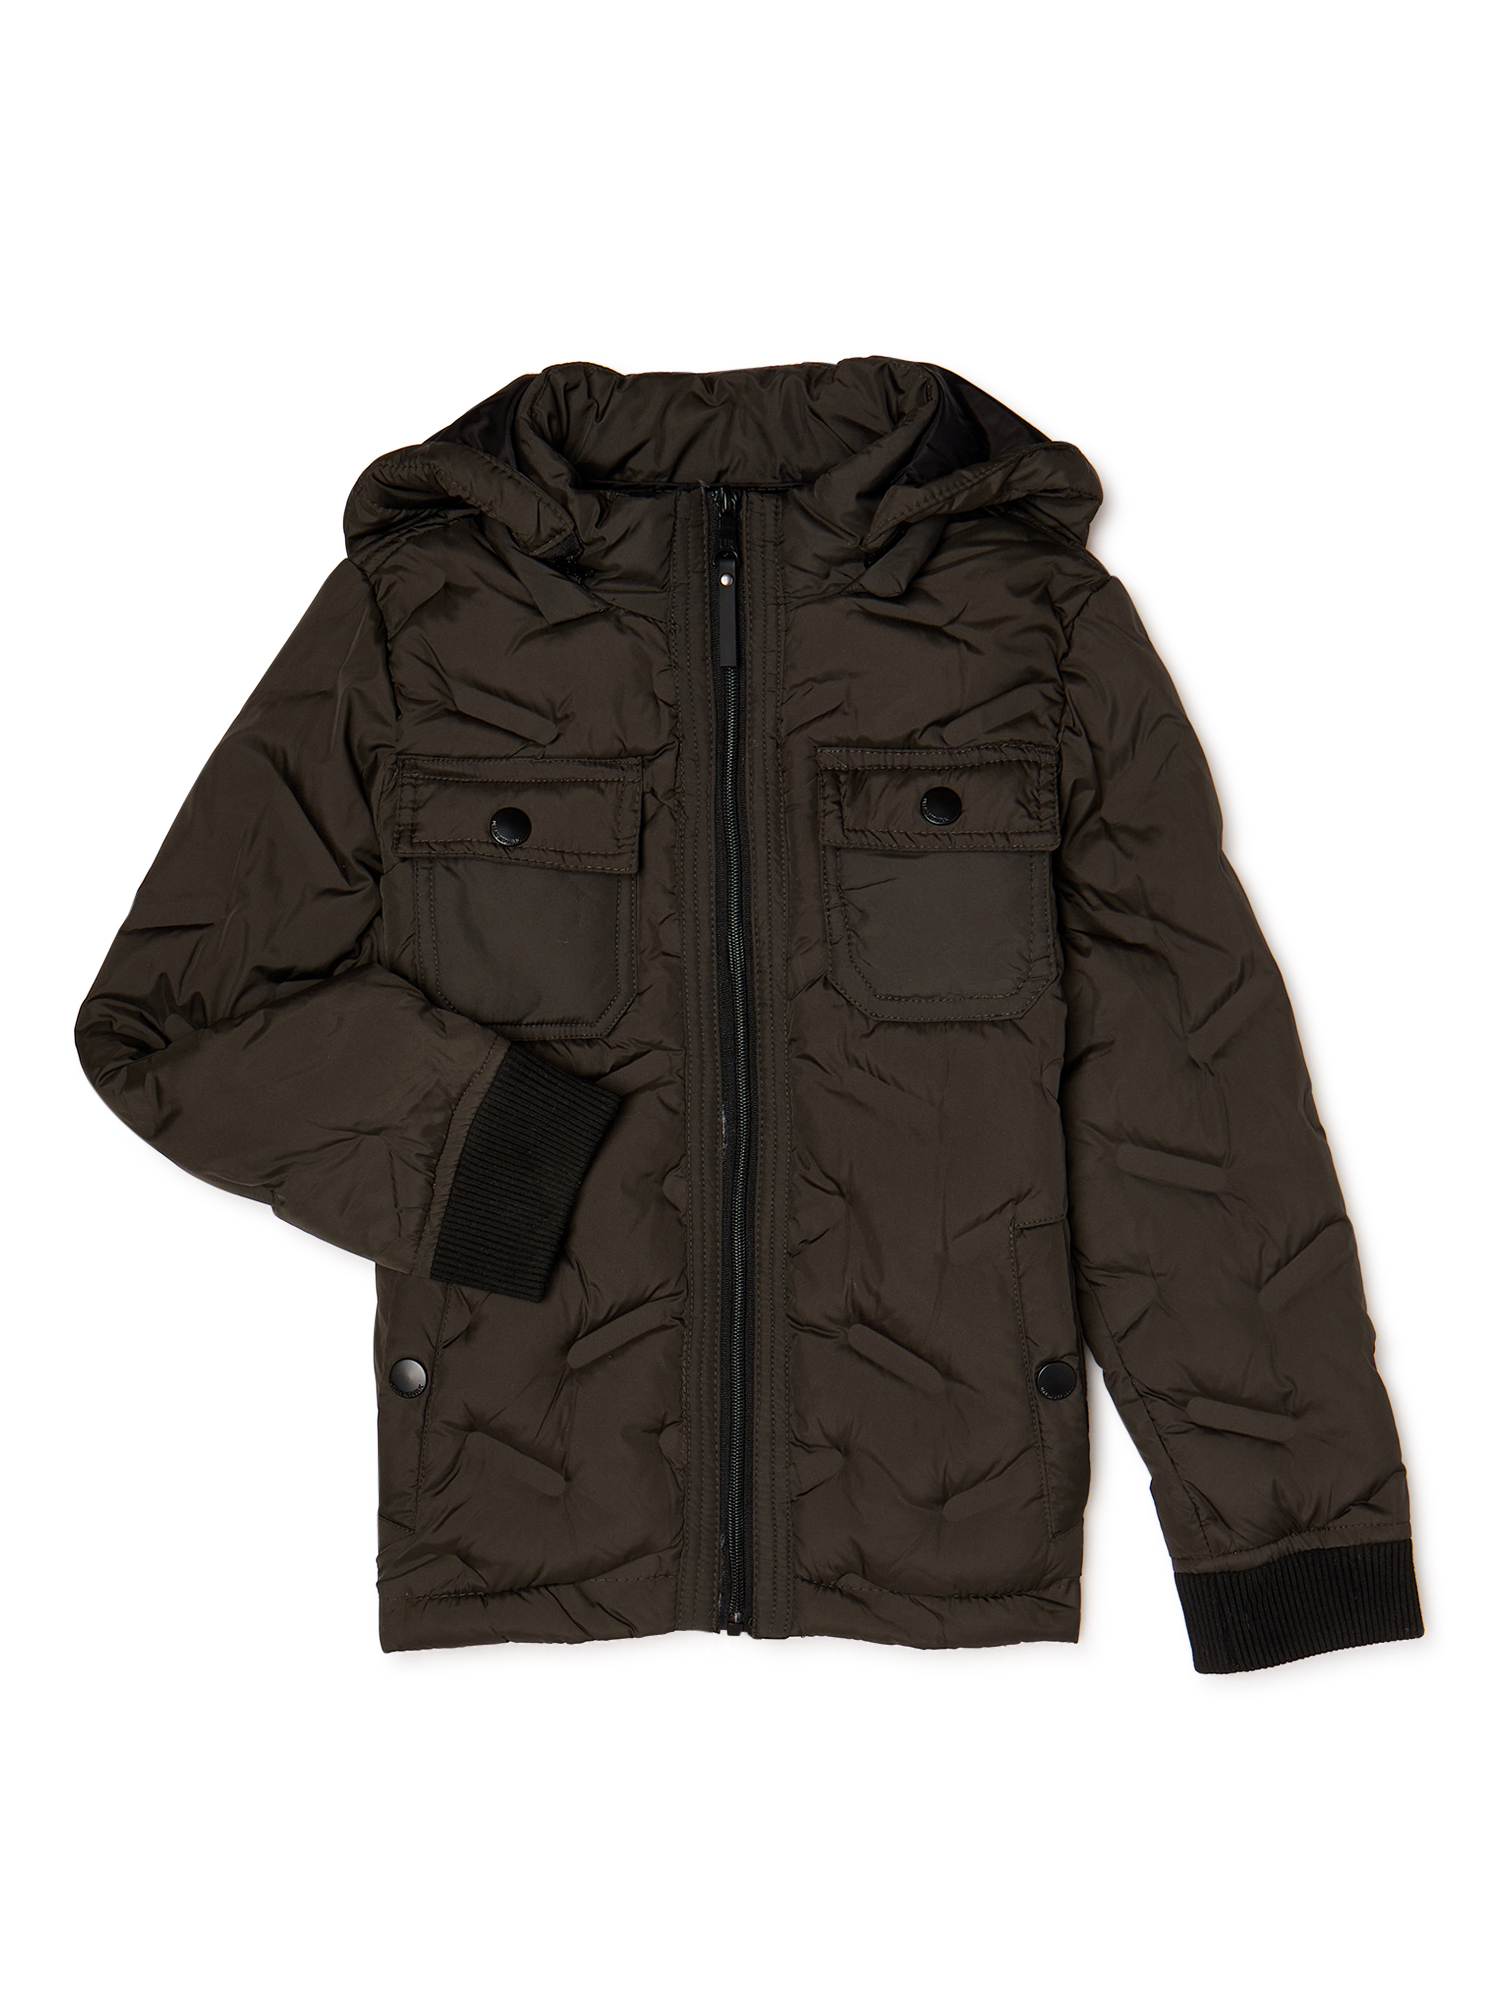 Urban Republic 'Heat Seal' Quilted Jacket with Zip Off Hood, Sizes 4-20 - image 1 of 3